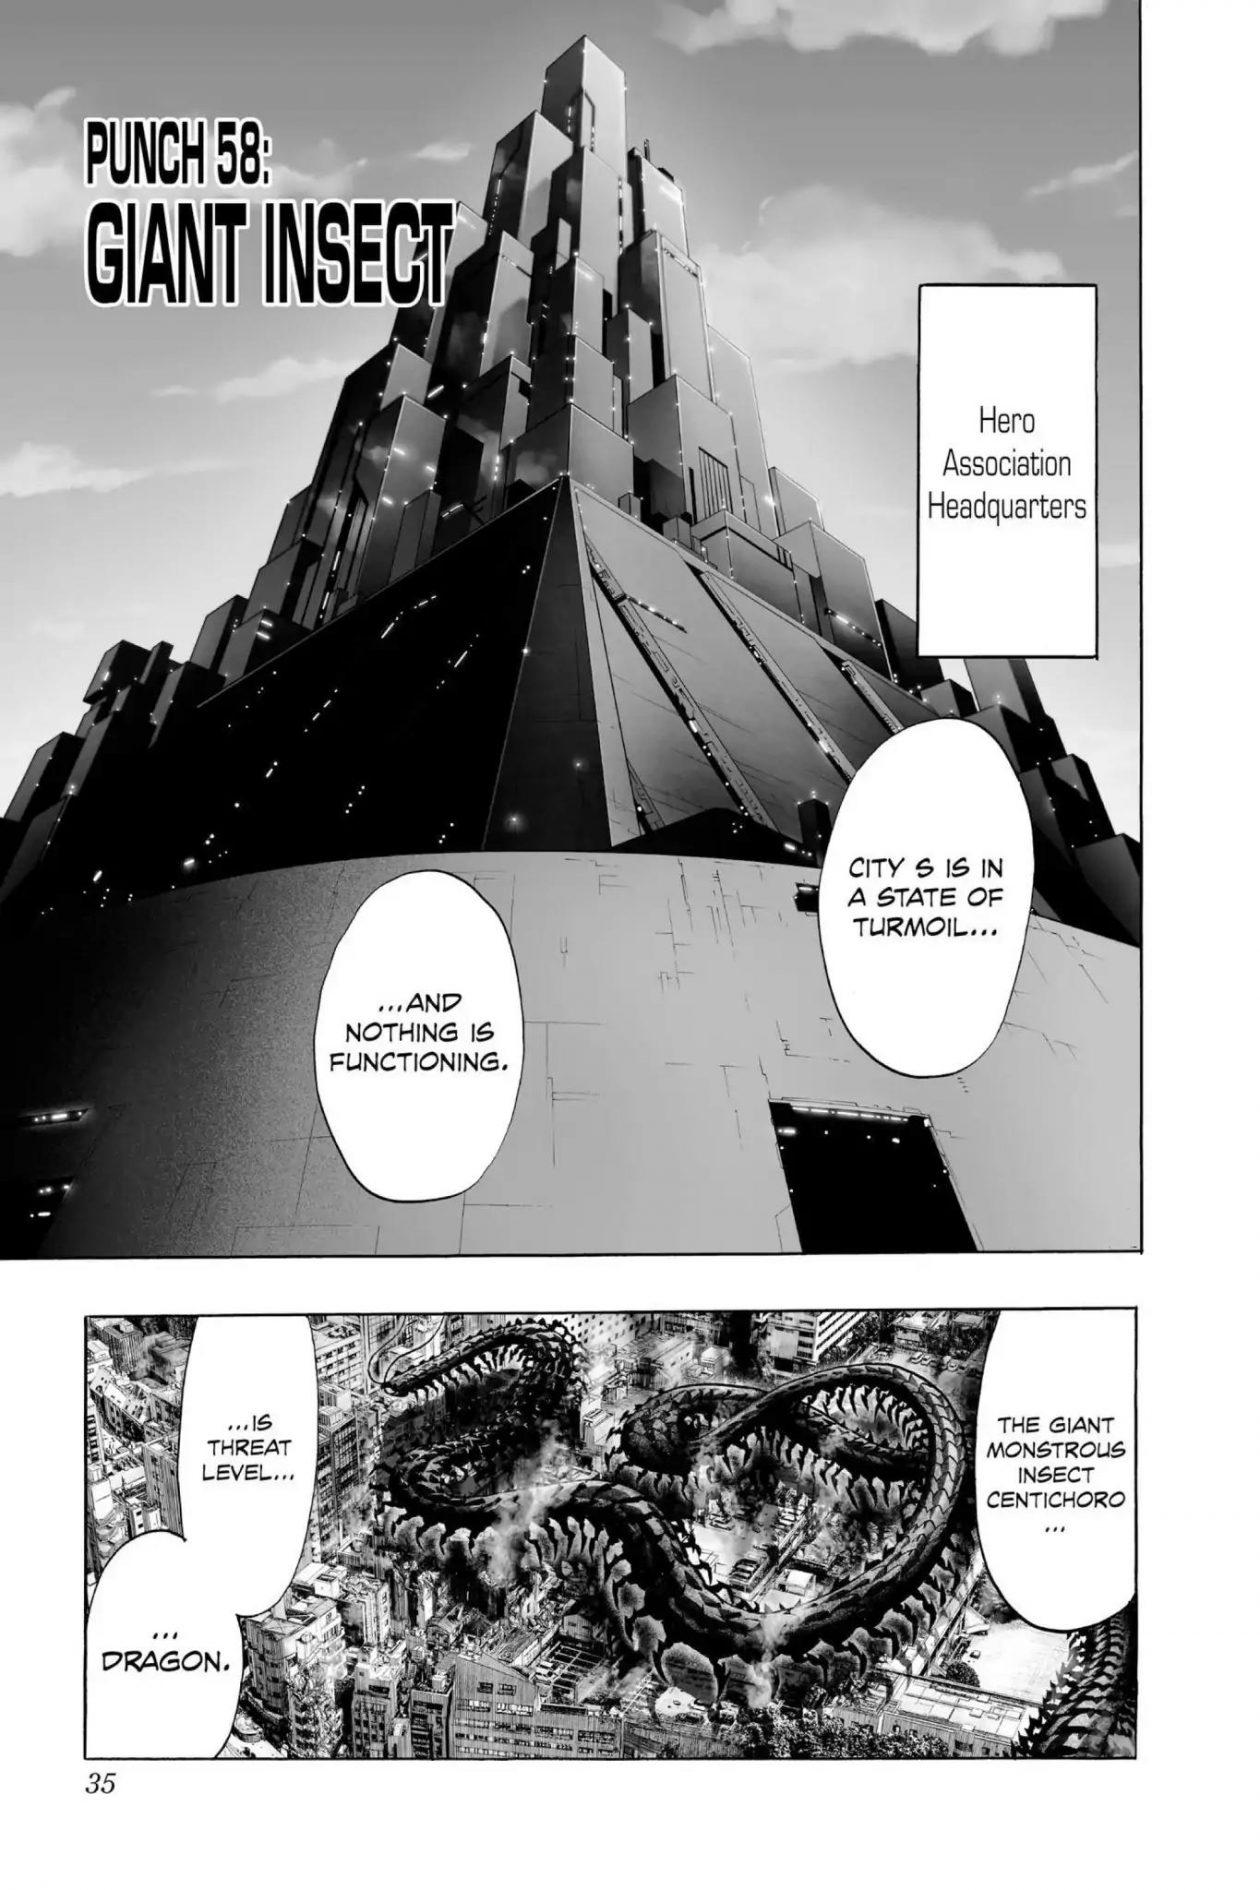 One Punch Man, Chapter 58 Giant Insect